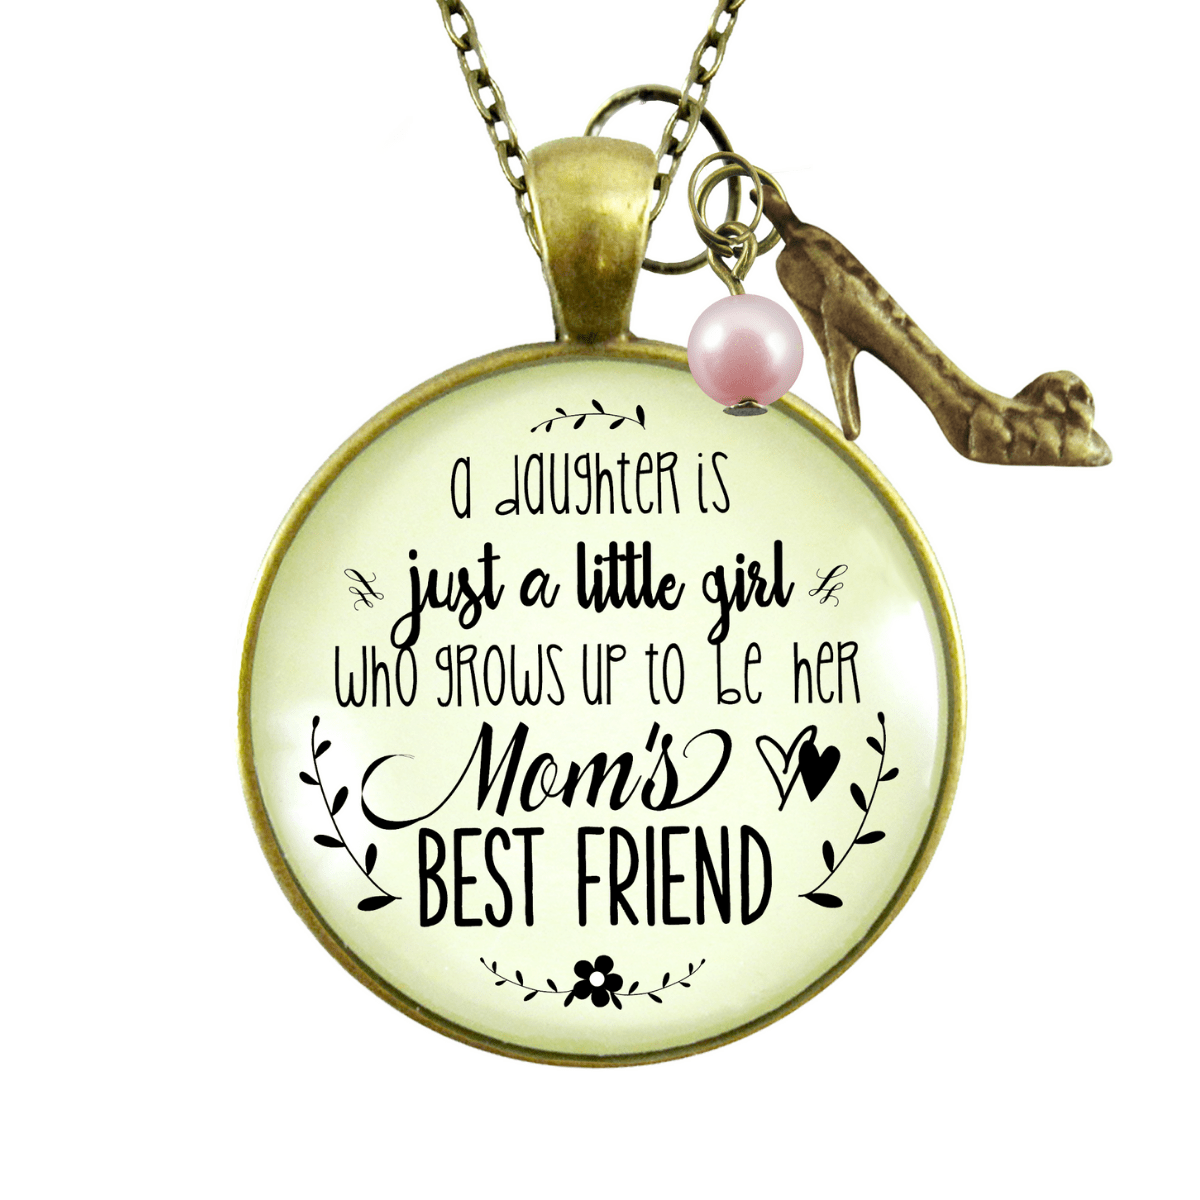 Gutsy Goodness Mother Daughter Necklace She Grows Up To Be Mom's Best Friend Jewelry Gift - Gutsy Goodness Handmade Jewelry;A Daughter Is Just A Little Girl - High Heel - Pink Pearl - Gutsy Goodness Handmade Jewelry Gifts